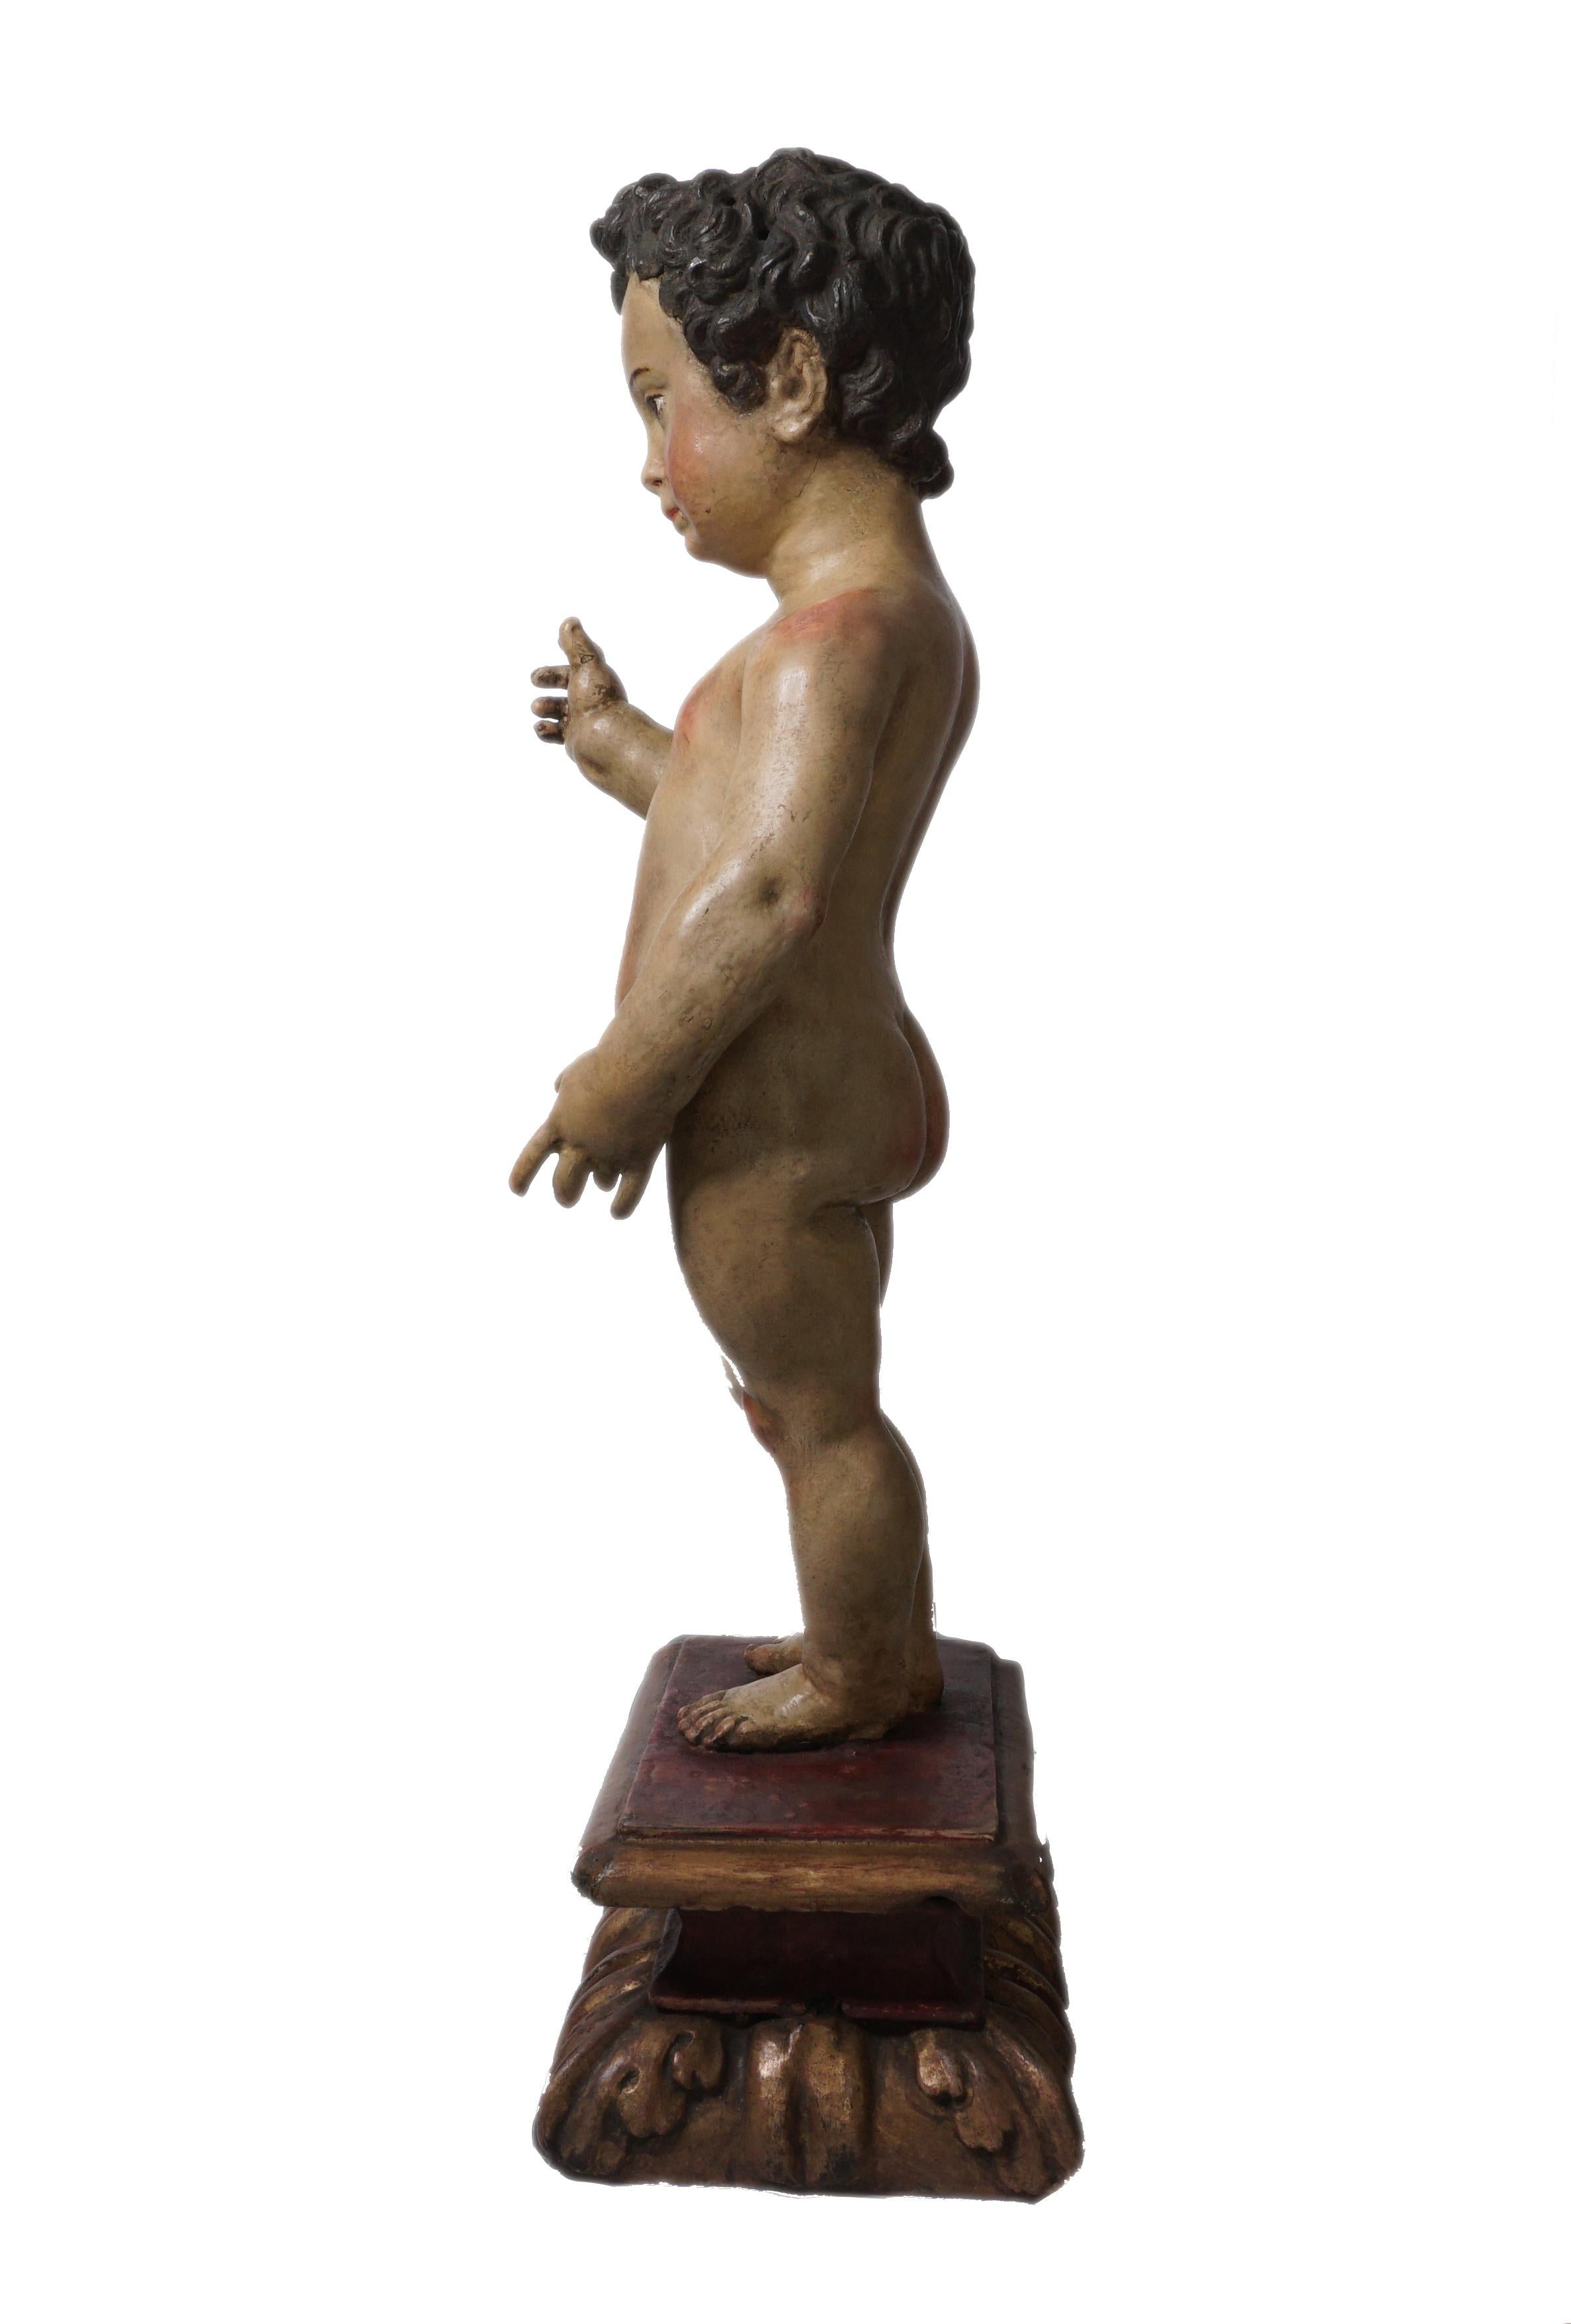 Beautiful Infant Christ 17th Century Attributed to Martínez Montañes
Made in Polychrome and Lead with slip, The Child naked, blessing in a naturalistic attitude, spreading throughout Spain.
His face with sweet features, the magnificent anatomical